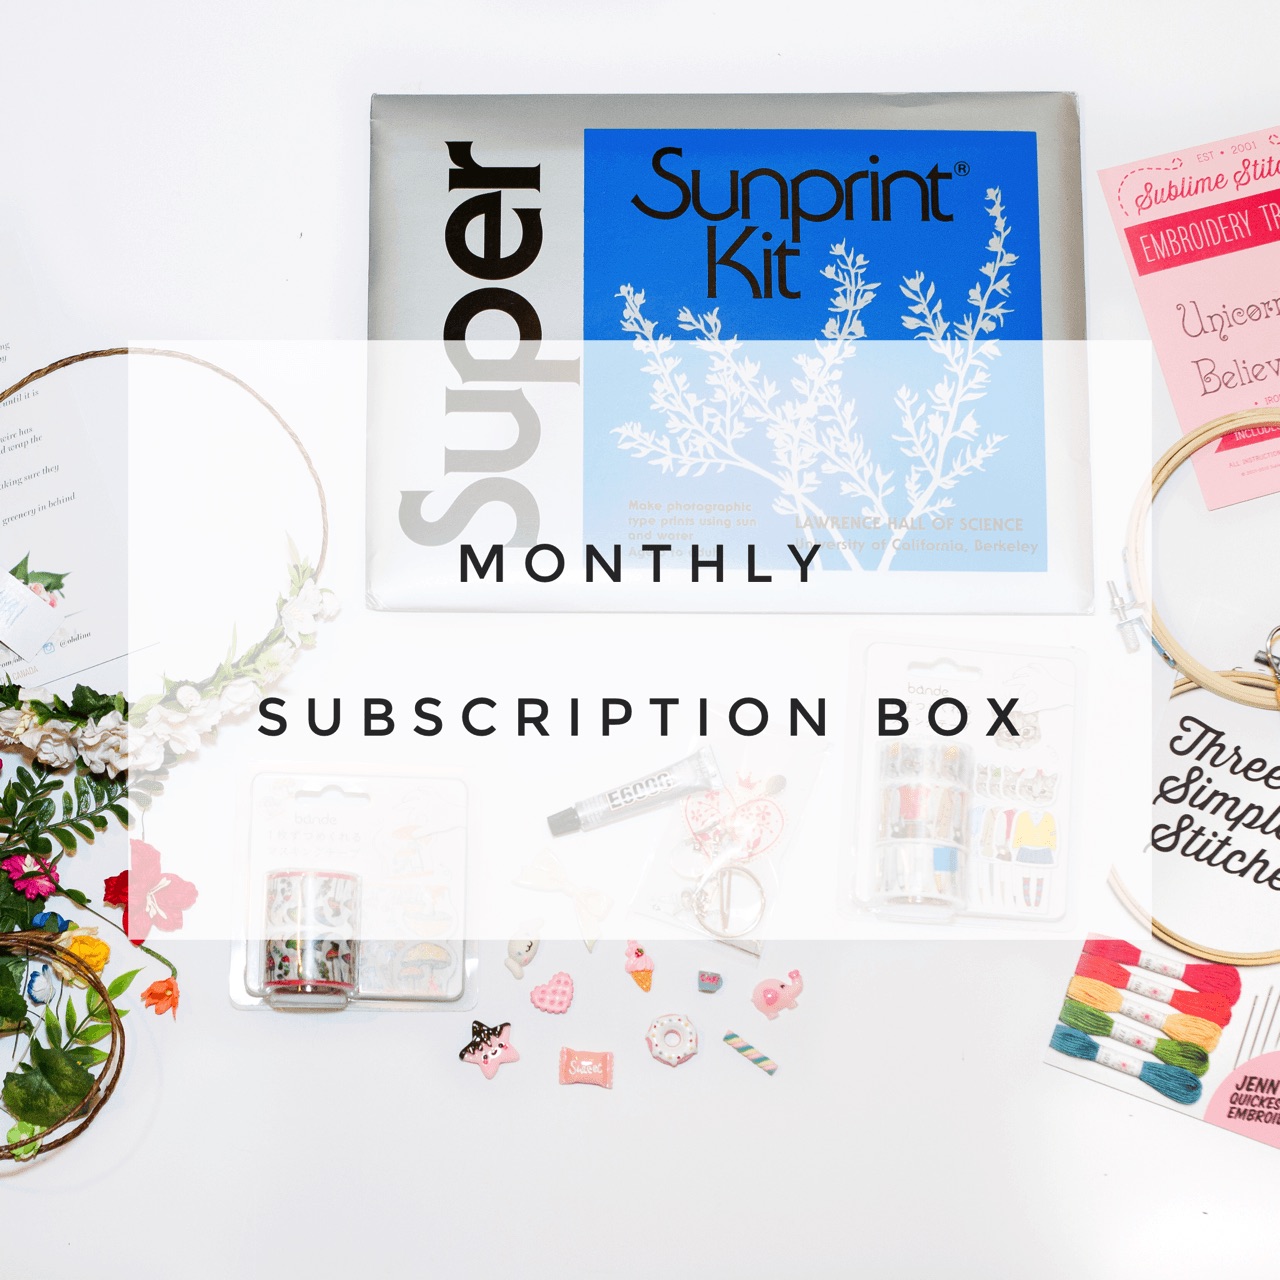 https://popshopamerica.com/wp-content/uploads/2019/01/craft-in-style-arts-and-crafts-monthly-subscription-box.jpg